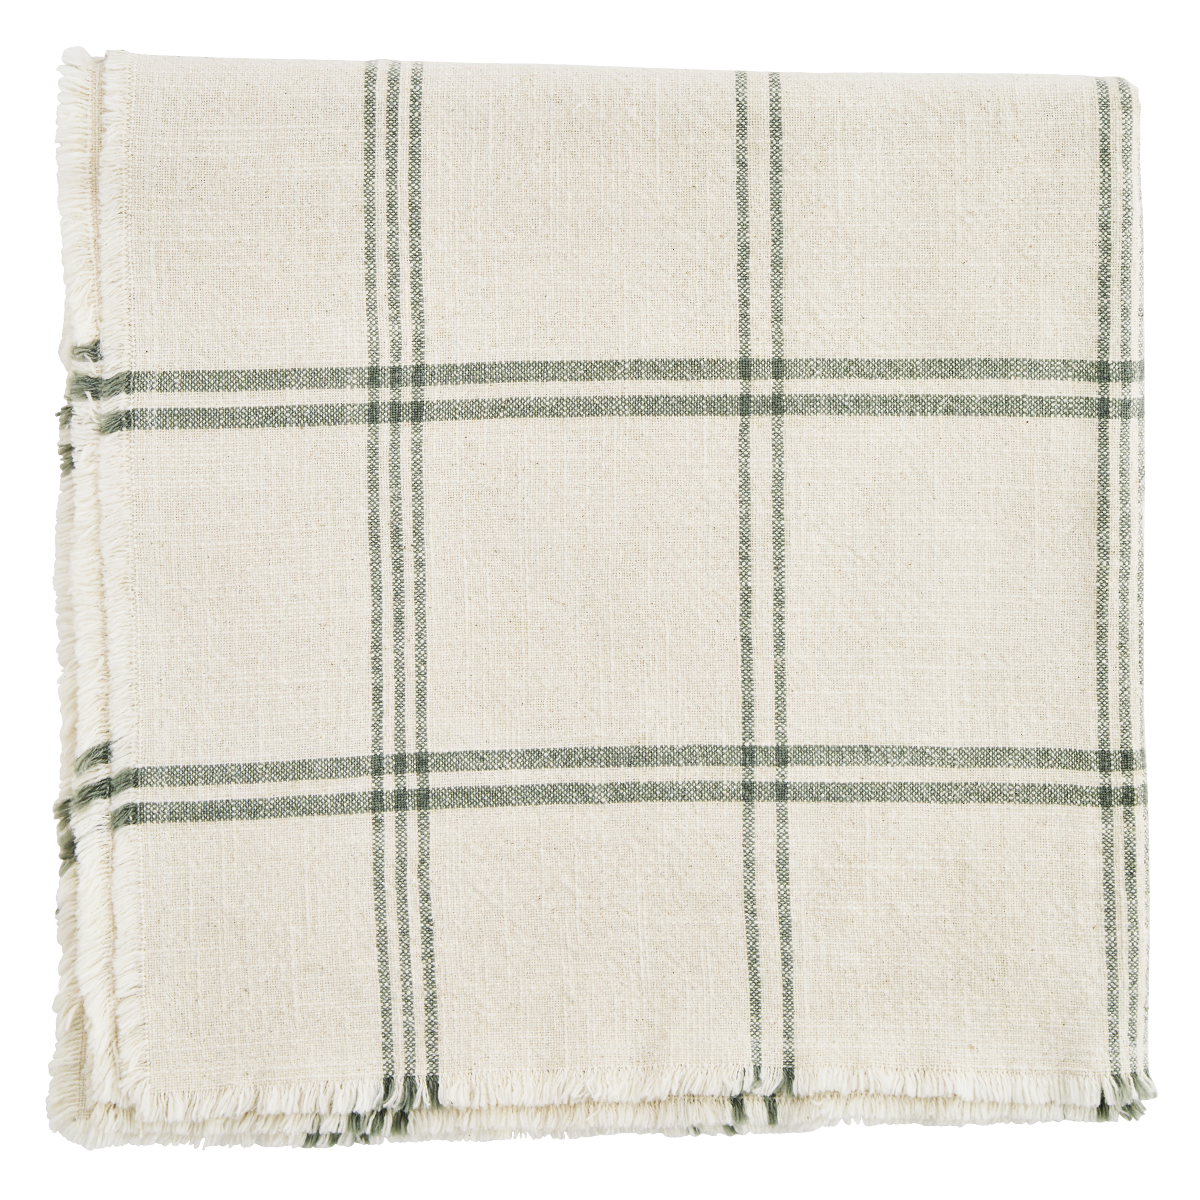 Checked table cloth w/ fringes